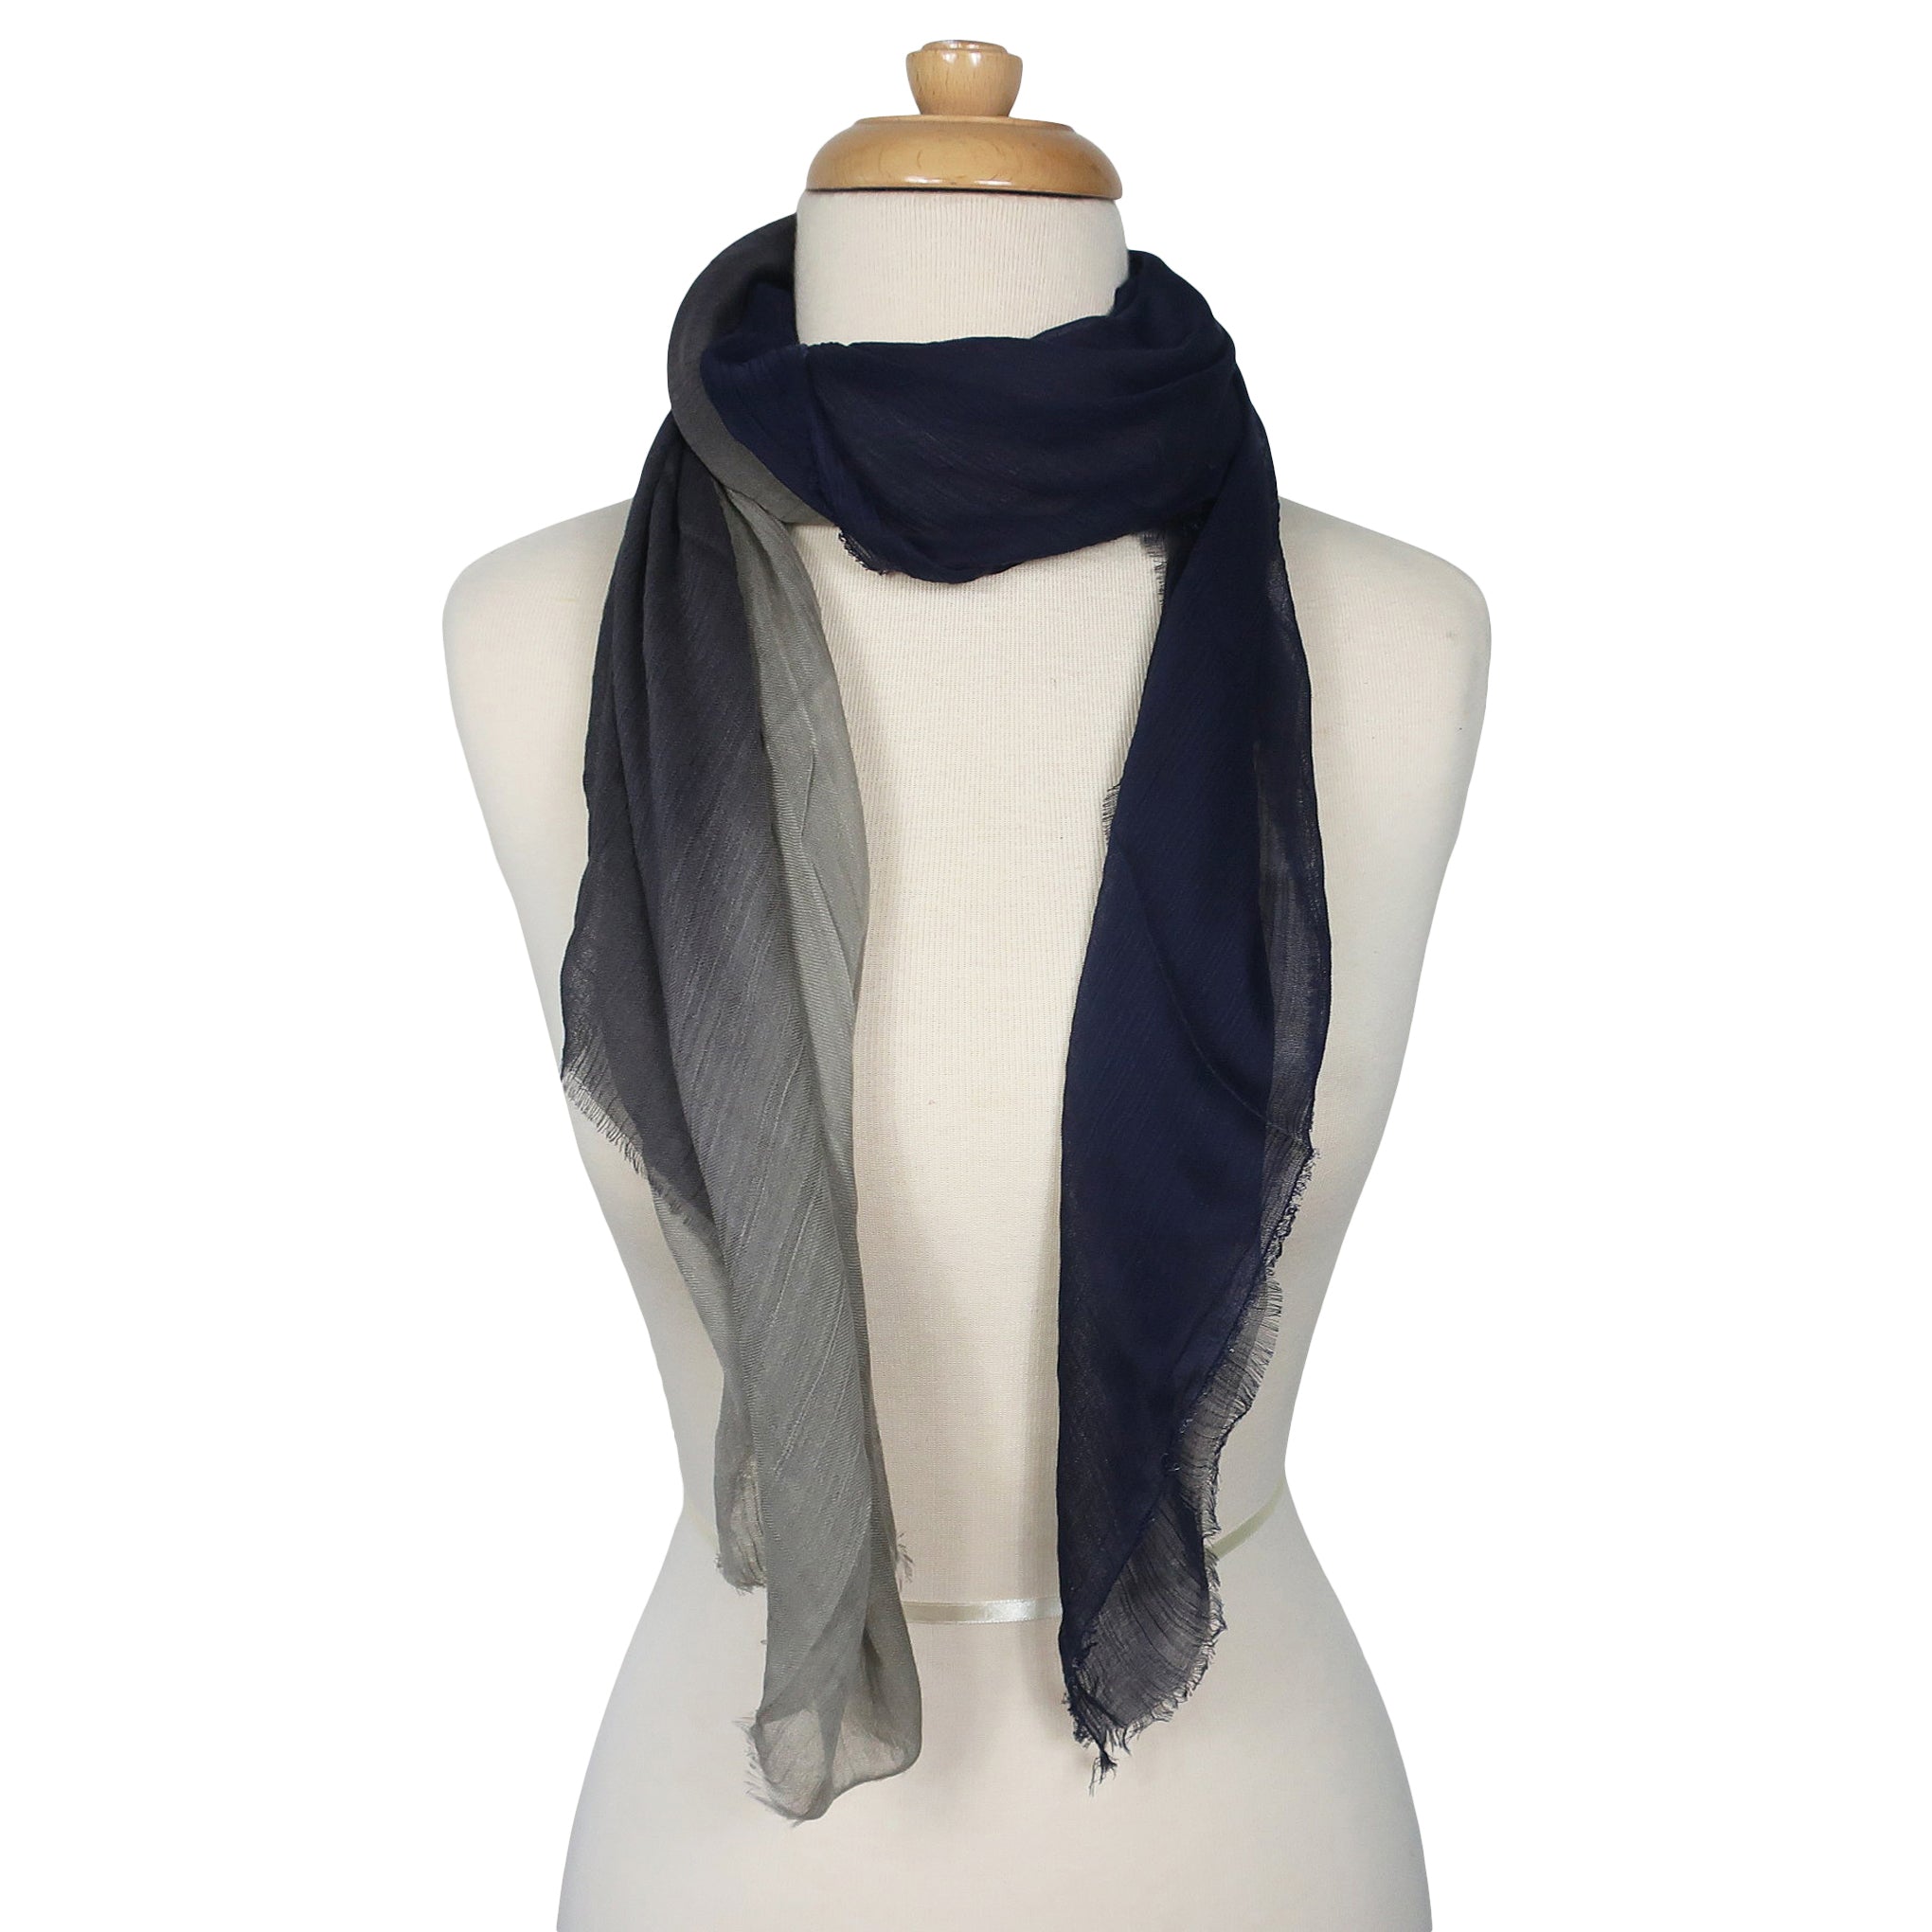 Blue Pacific Dream Cashmere and Silk Scarf in Navy and Gray Taupe 47 x 37